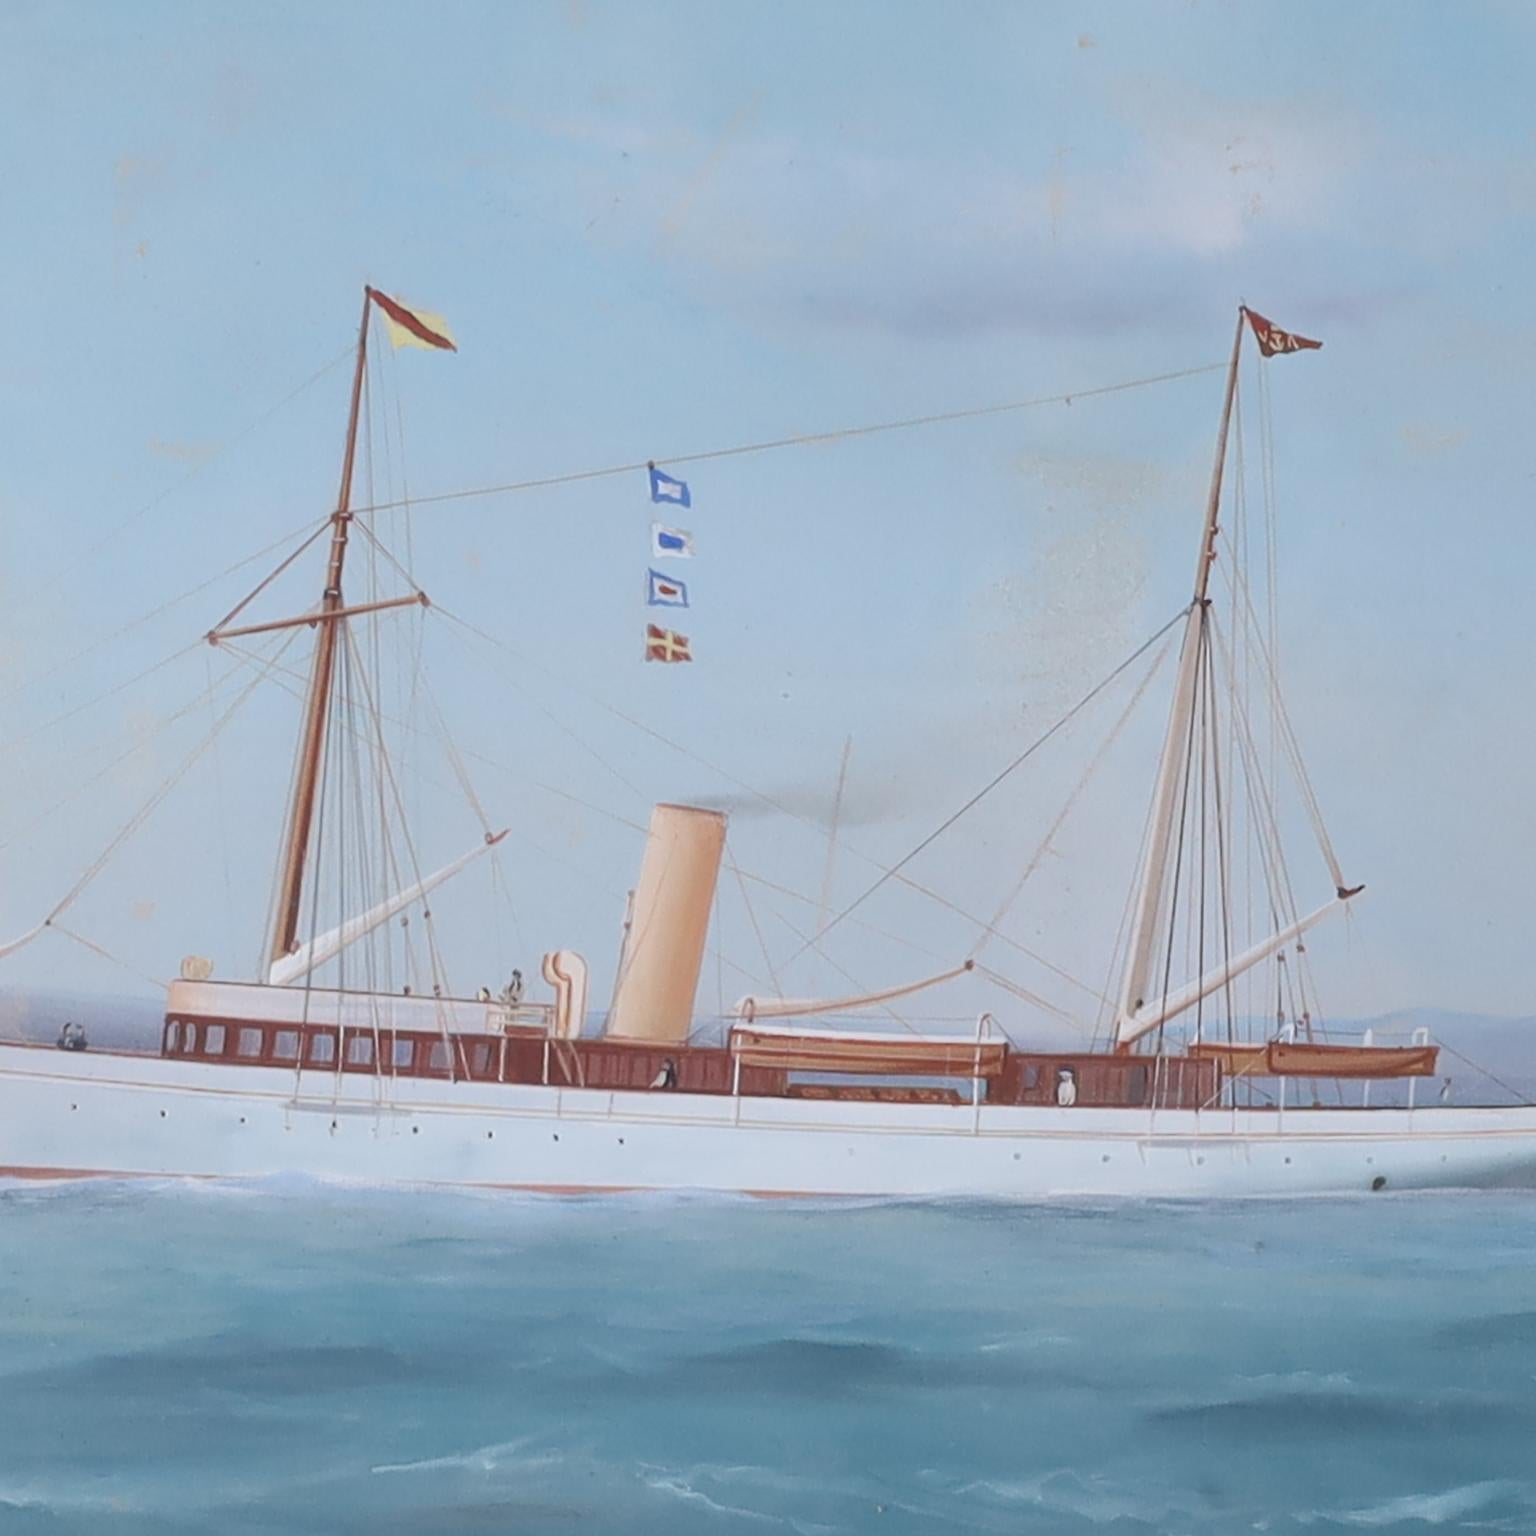 Antique painting of a steam powered yacht flying a British flag as seen on the Mediterranean sea with Mt. Vesuvius in the background. Executed in gouache by noted Italian marine artist Antonio De Simone in 1904. Presented in a mahogany frame under